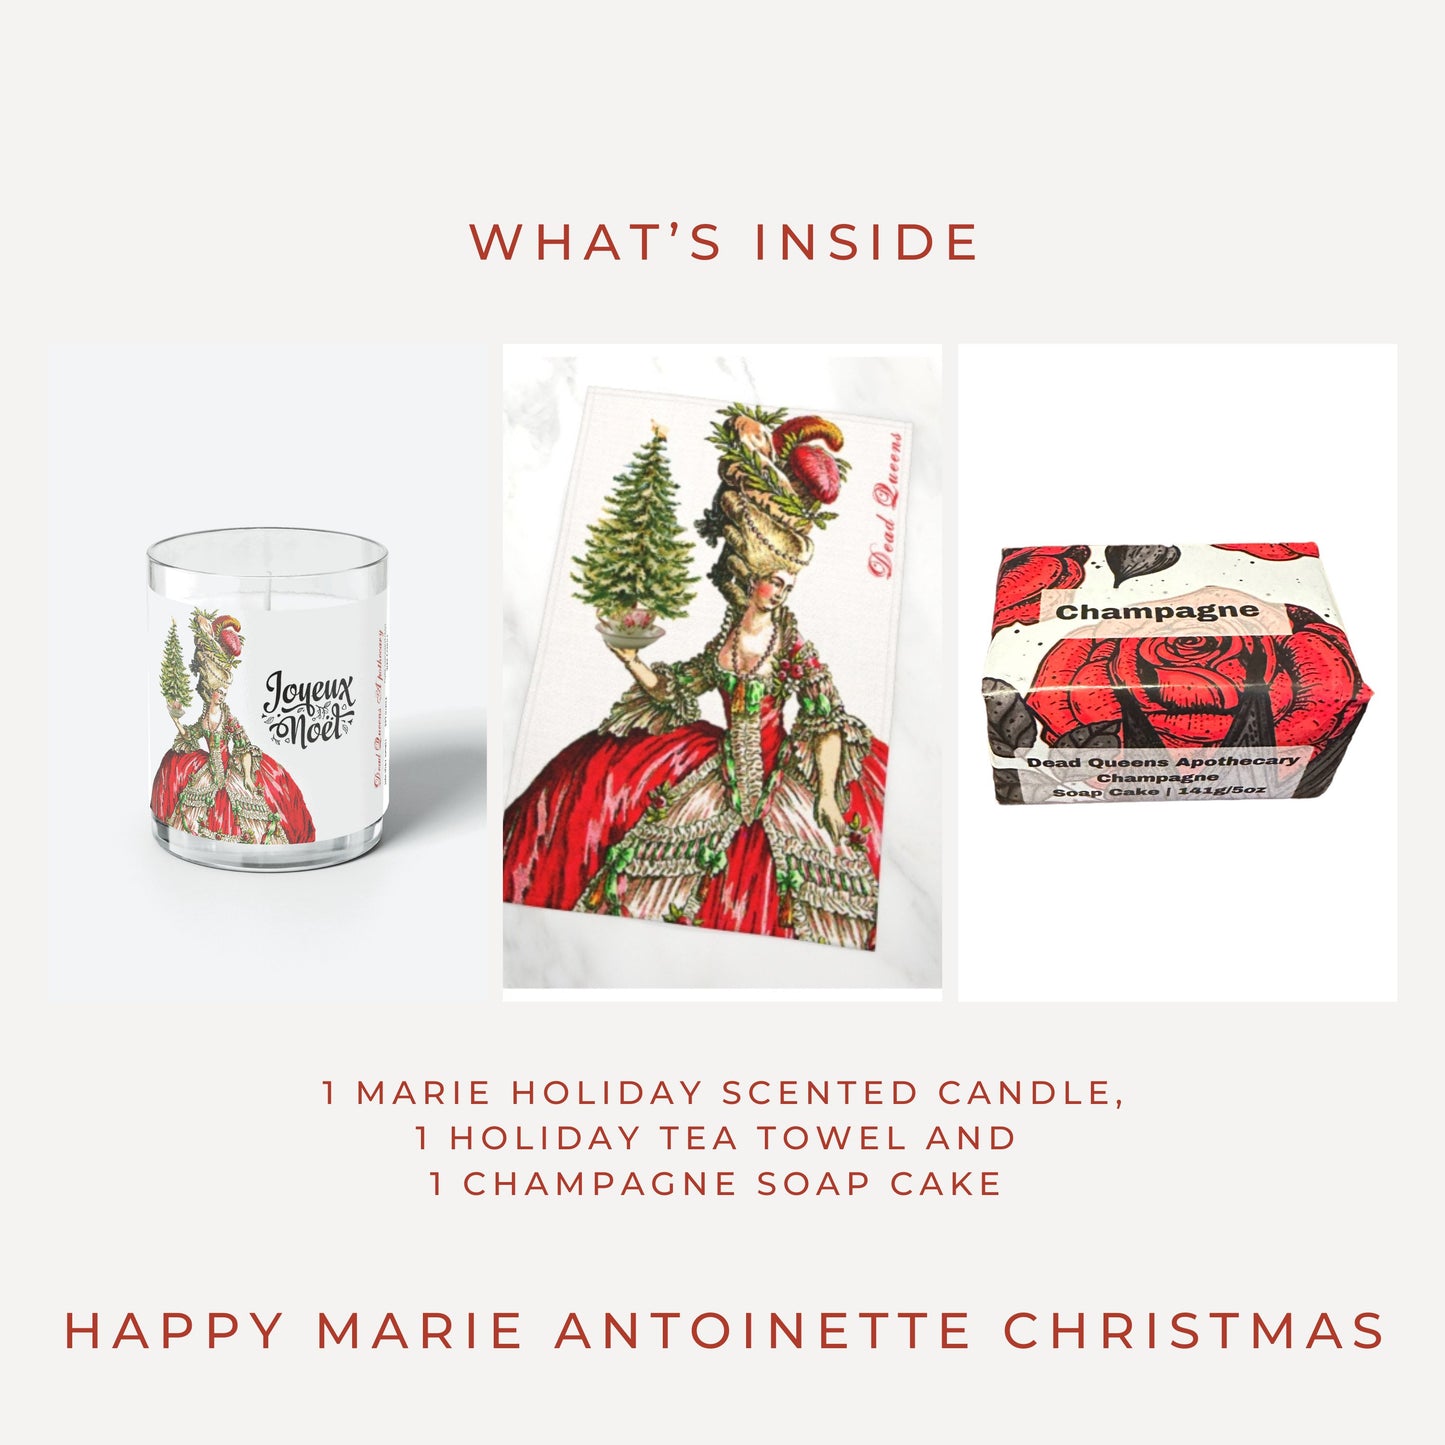 Limited Edition Marie Antoinette Holiday Spirit Stocking Gift Box